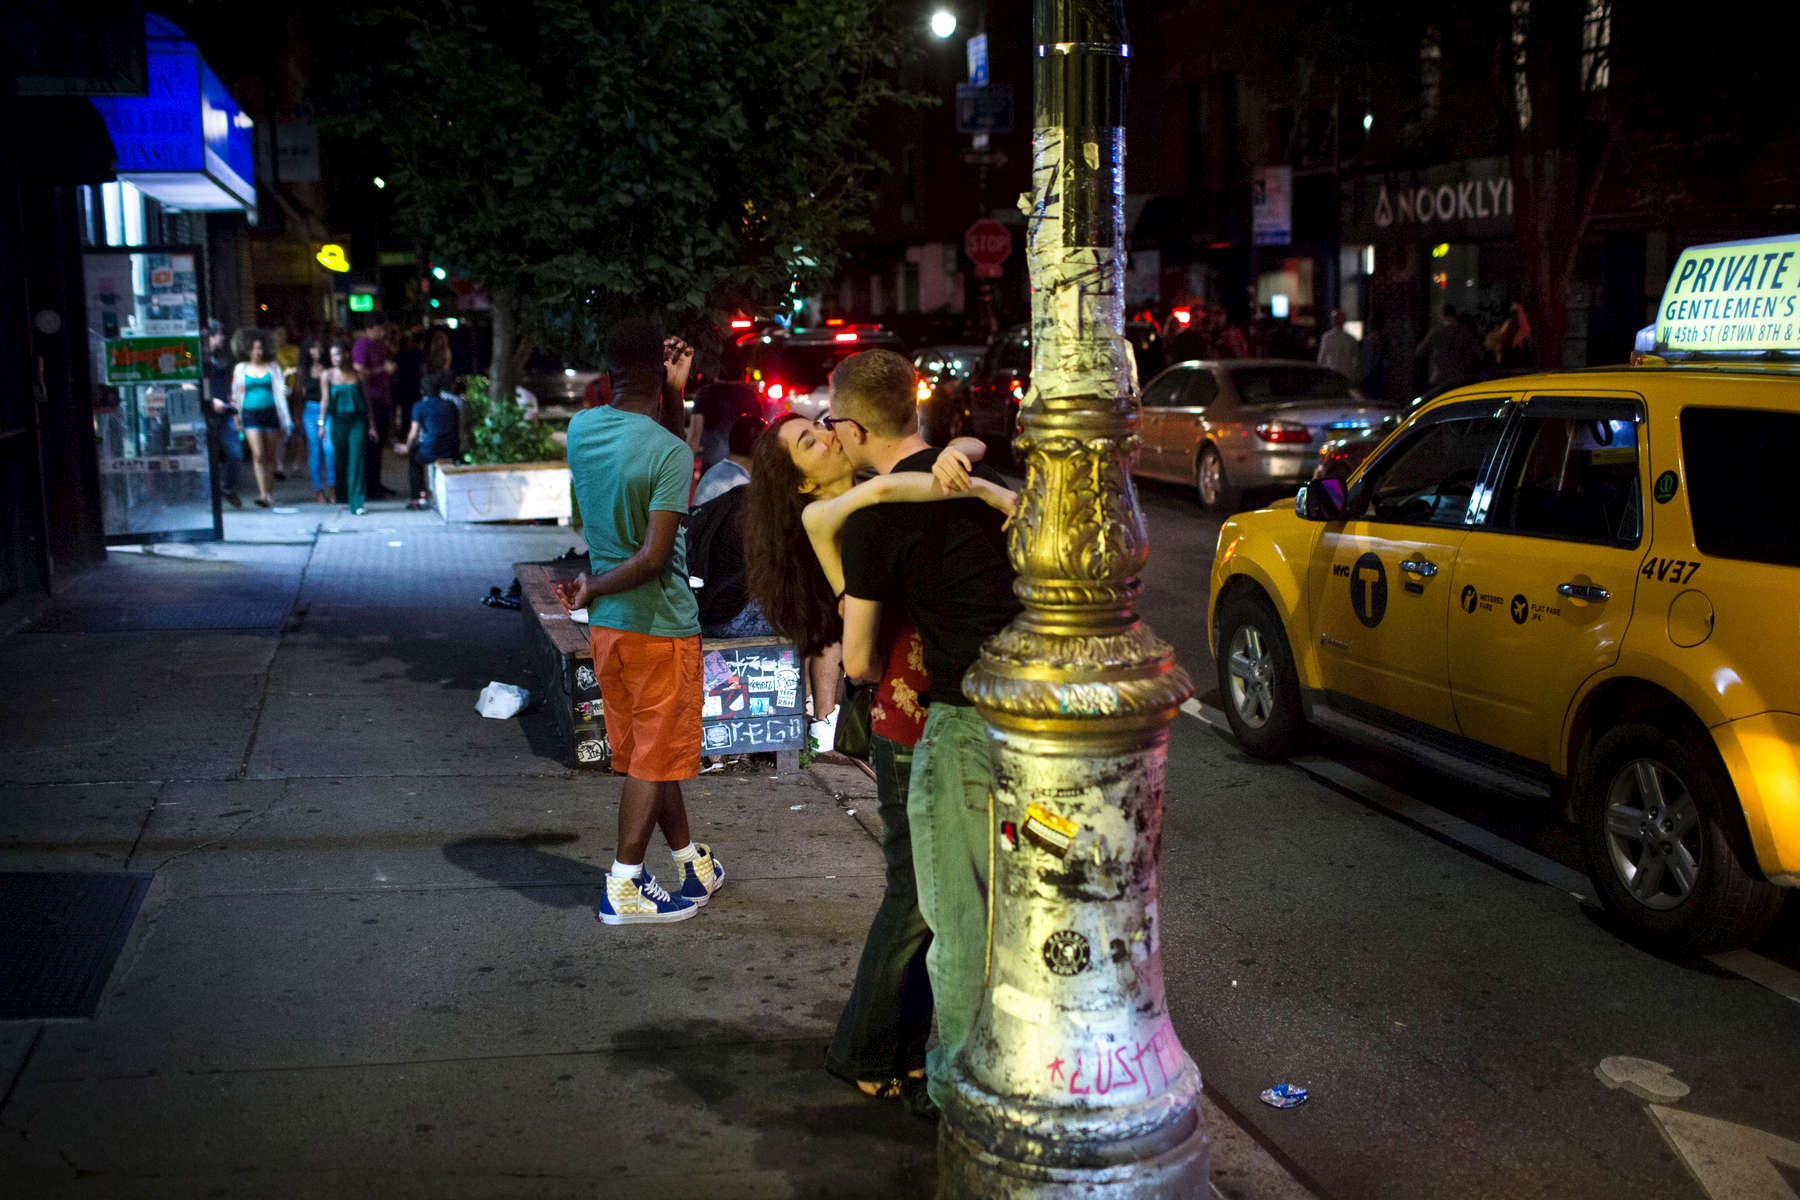 Manhattan, NY - July 29, 2018: Revelers embrace Stanton St. in the Lower East Side bar district in Manhattan, NY. Community groups are questioning the New York State Liquor Authority's practice of granting licenses in neighborhoods already saturated with bars and clubs.CREDIT: Kevin Hagen for The New York Times